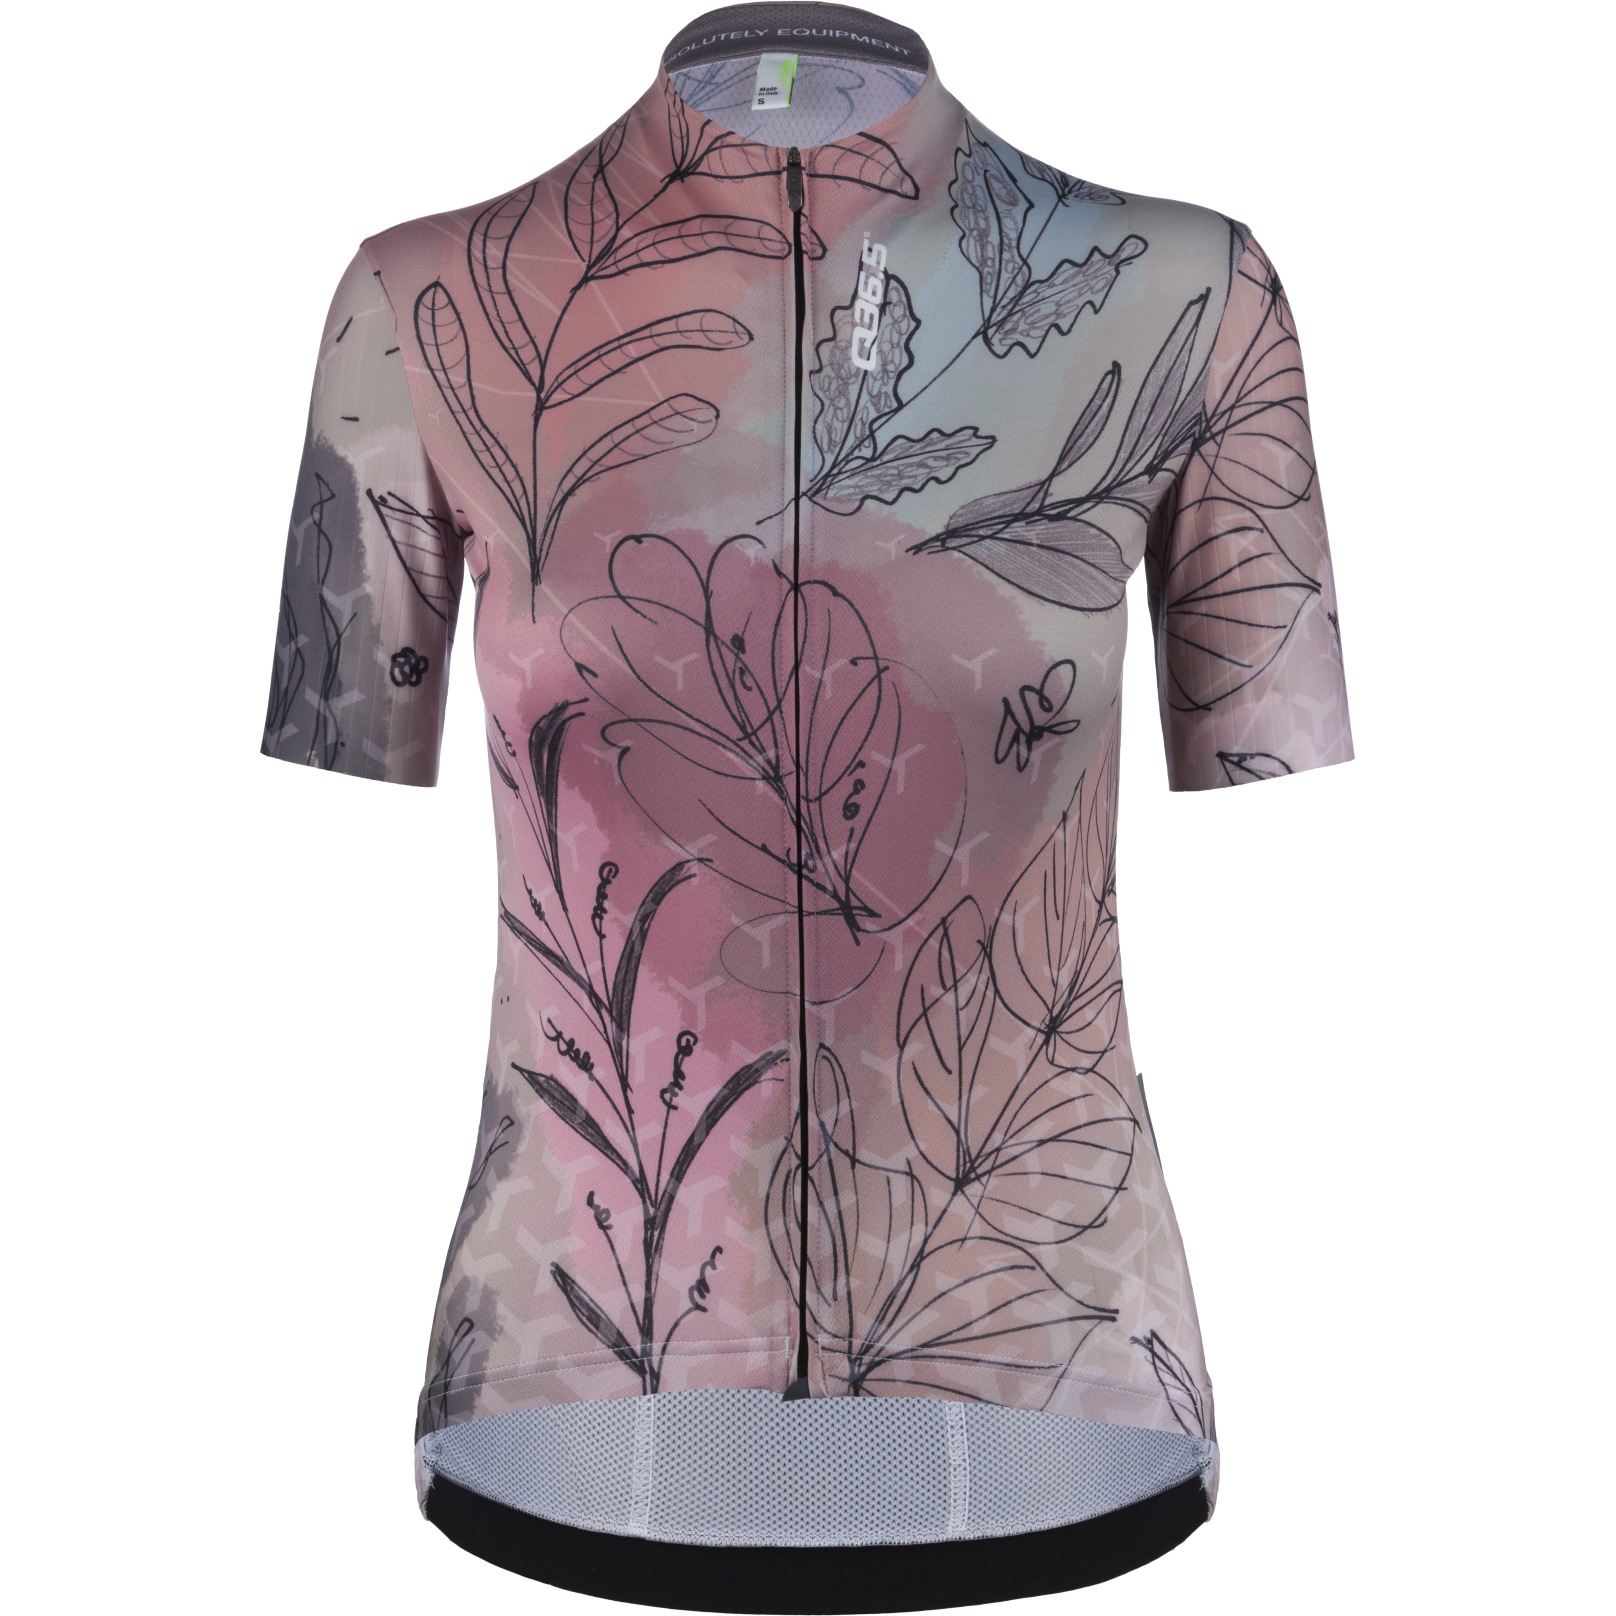 Image of Q36.5 G1 Women's Short Sleeve Jersey - flowers and leaves autumn